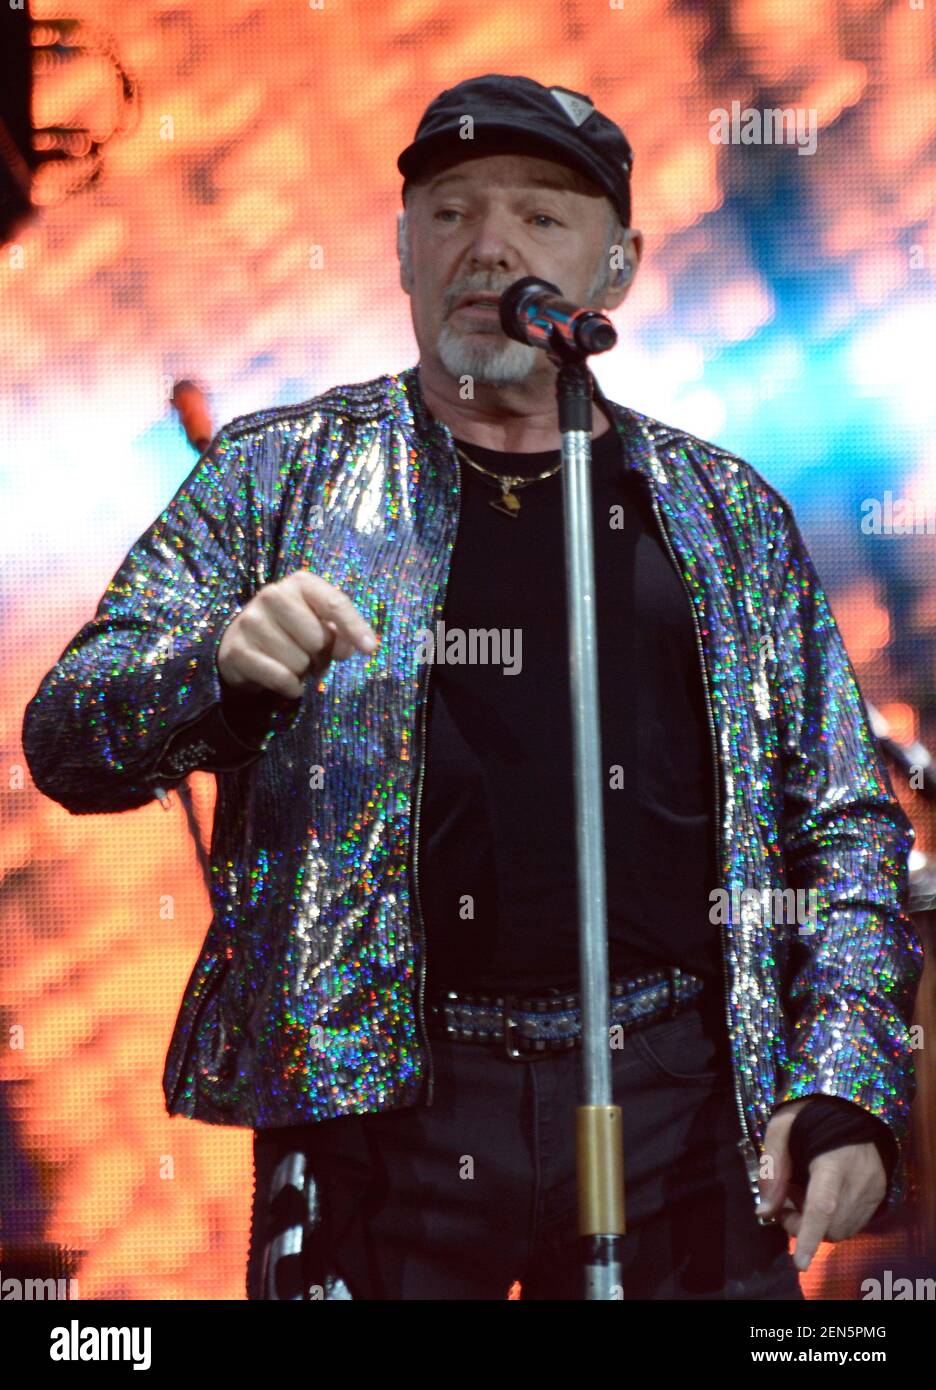 The famous Italian rockstar Vasco Rossi, also known as Vasco or with the  nickname Il Blasco performs on stage with his tour "Vasco Non Stop Live  2019" during the last of the